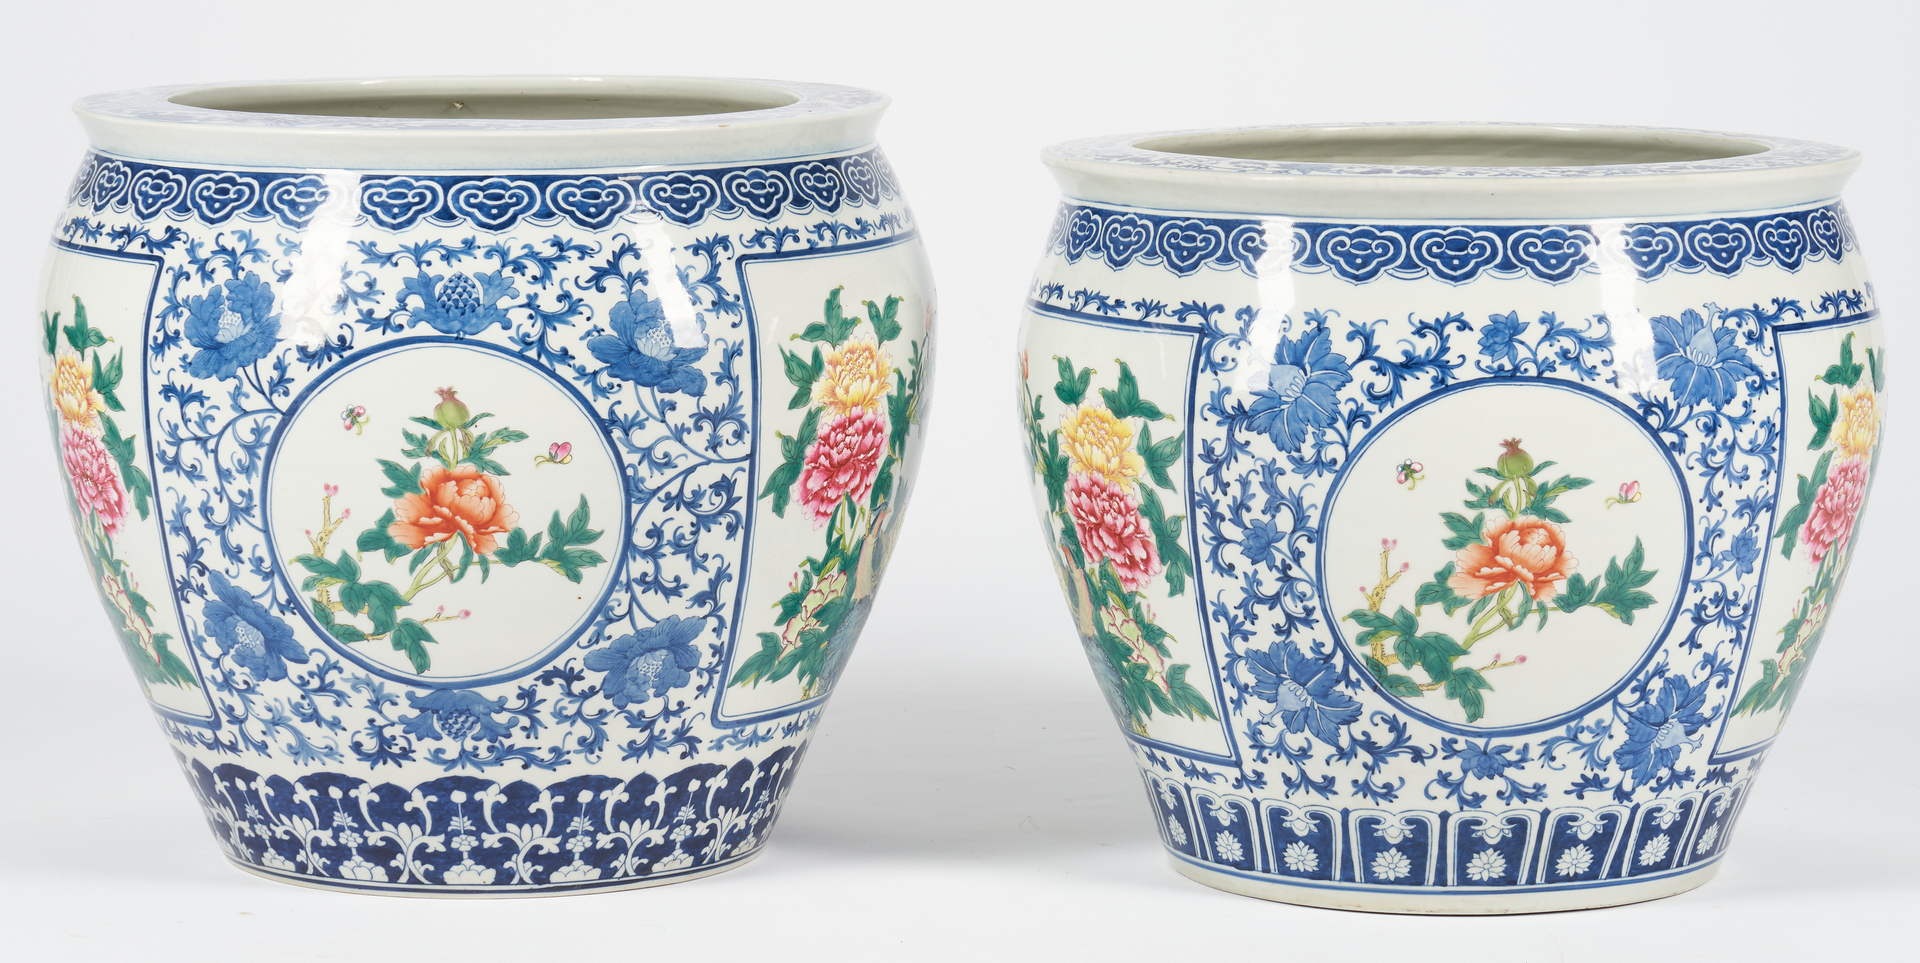 Lot 394: Near Pair of Blue and White Porcelain Fish Bowls